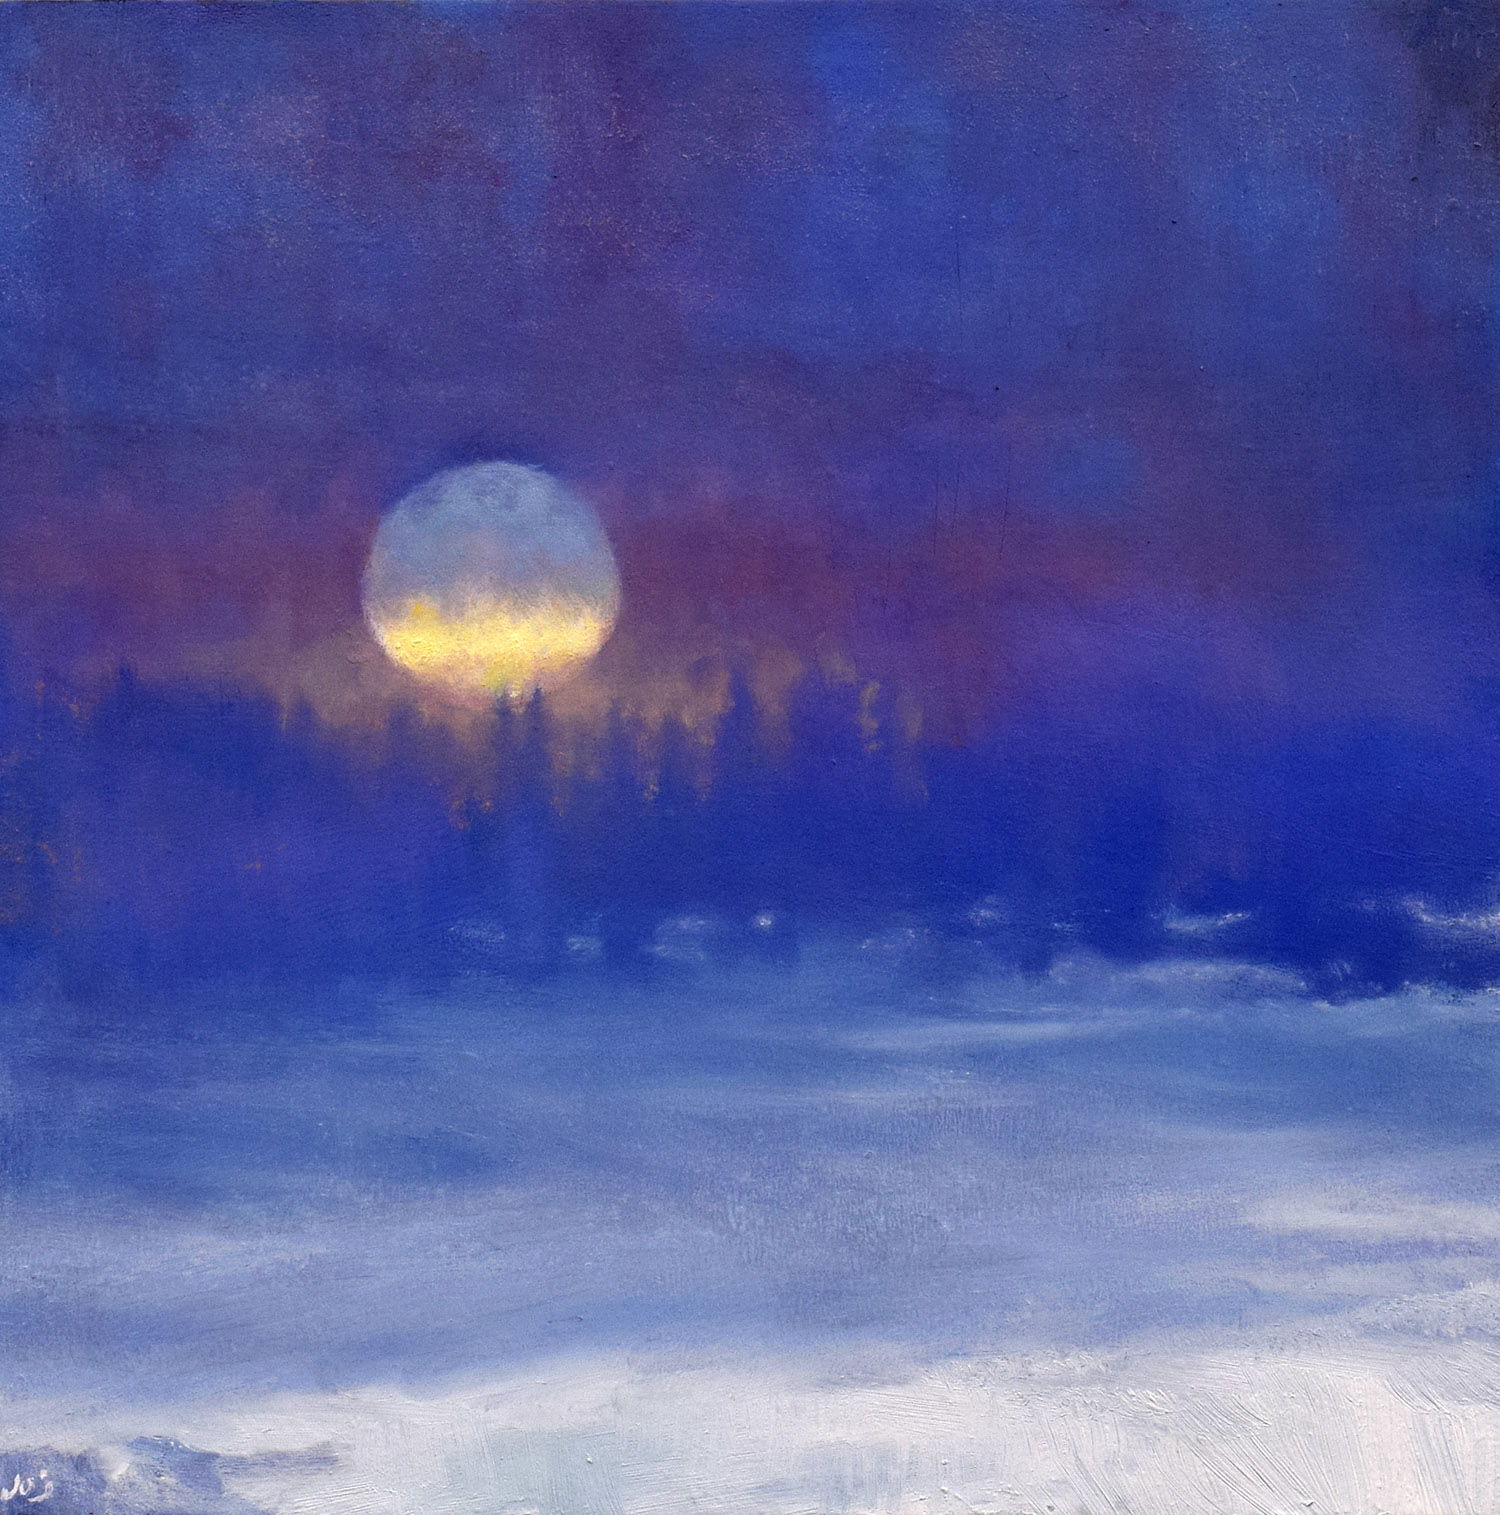 Winter landscape nocturne with a full moon called 'The Frozen Field V' by John O'Grady